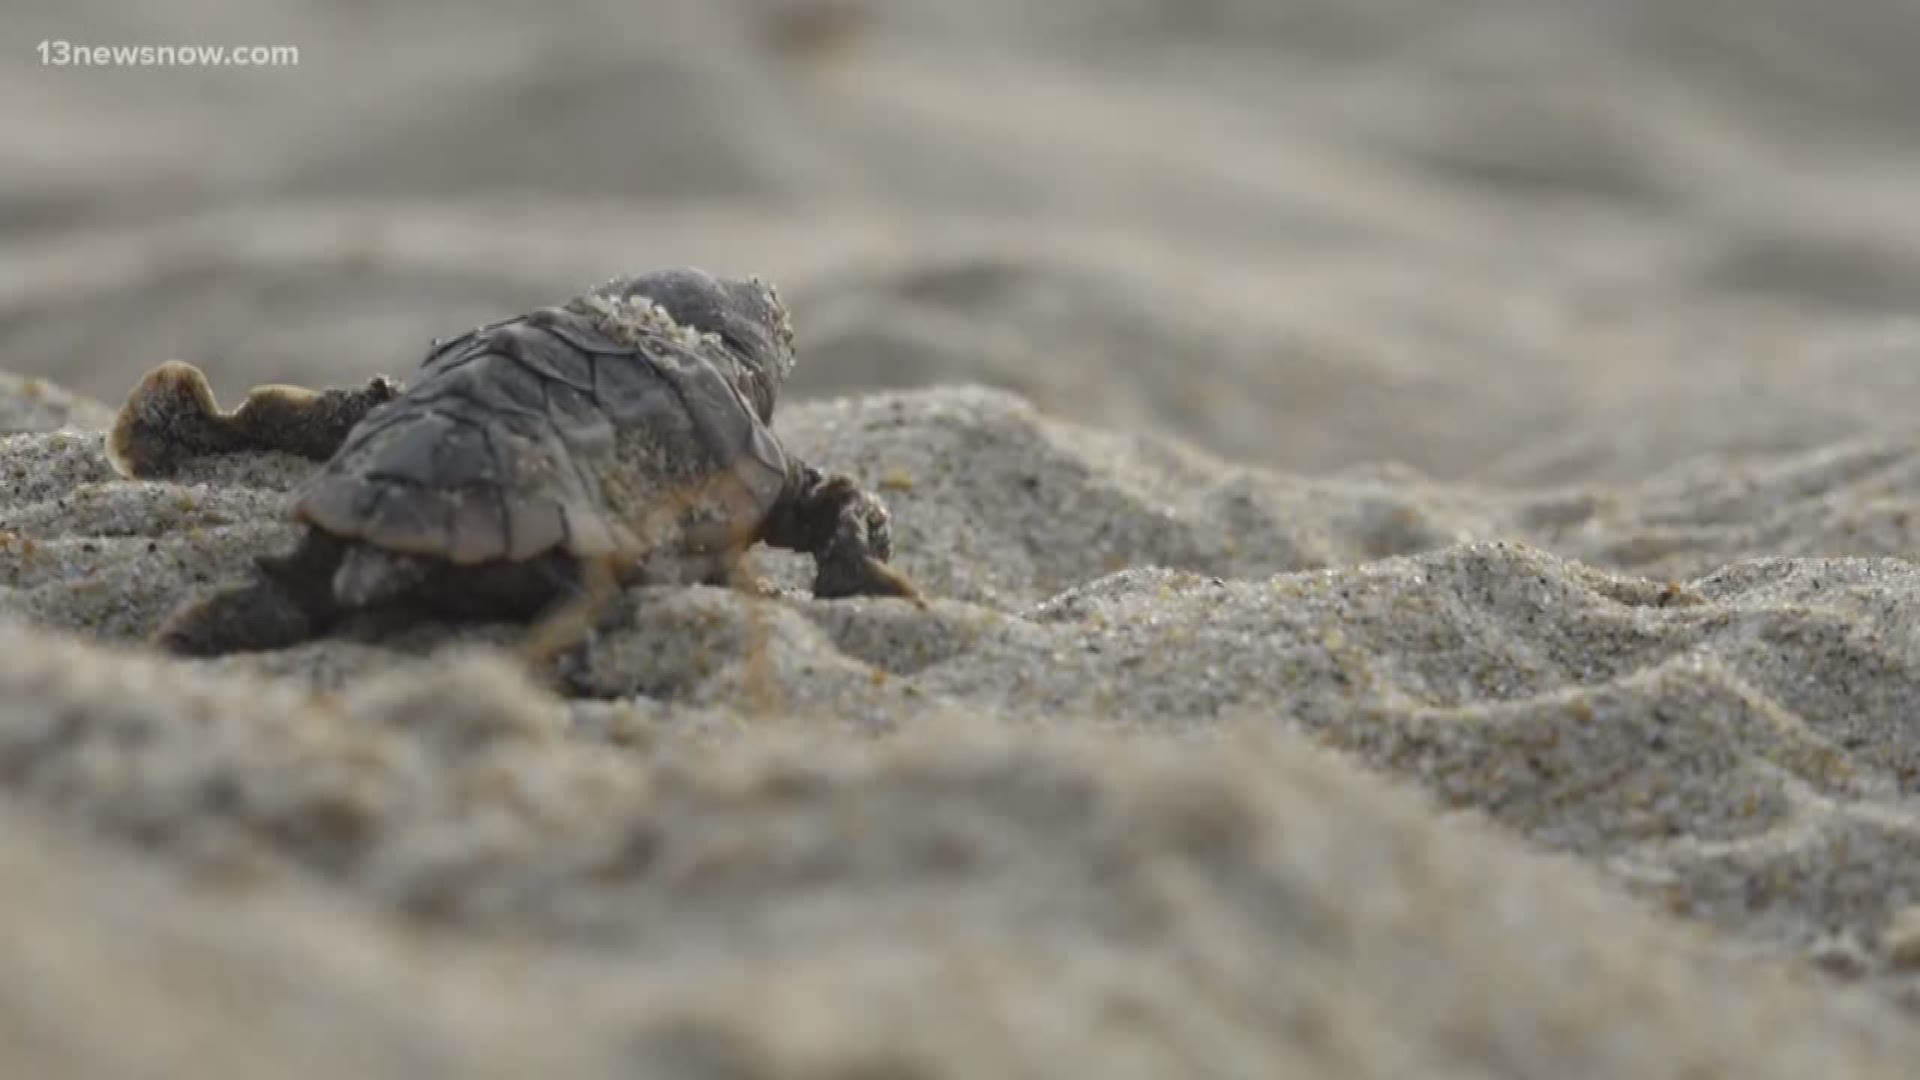 104 sea turtle hatchlings found, safely released into ocean in the